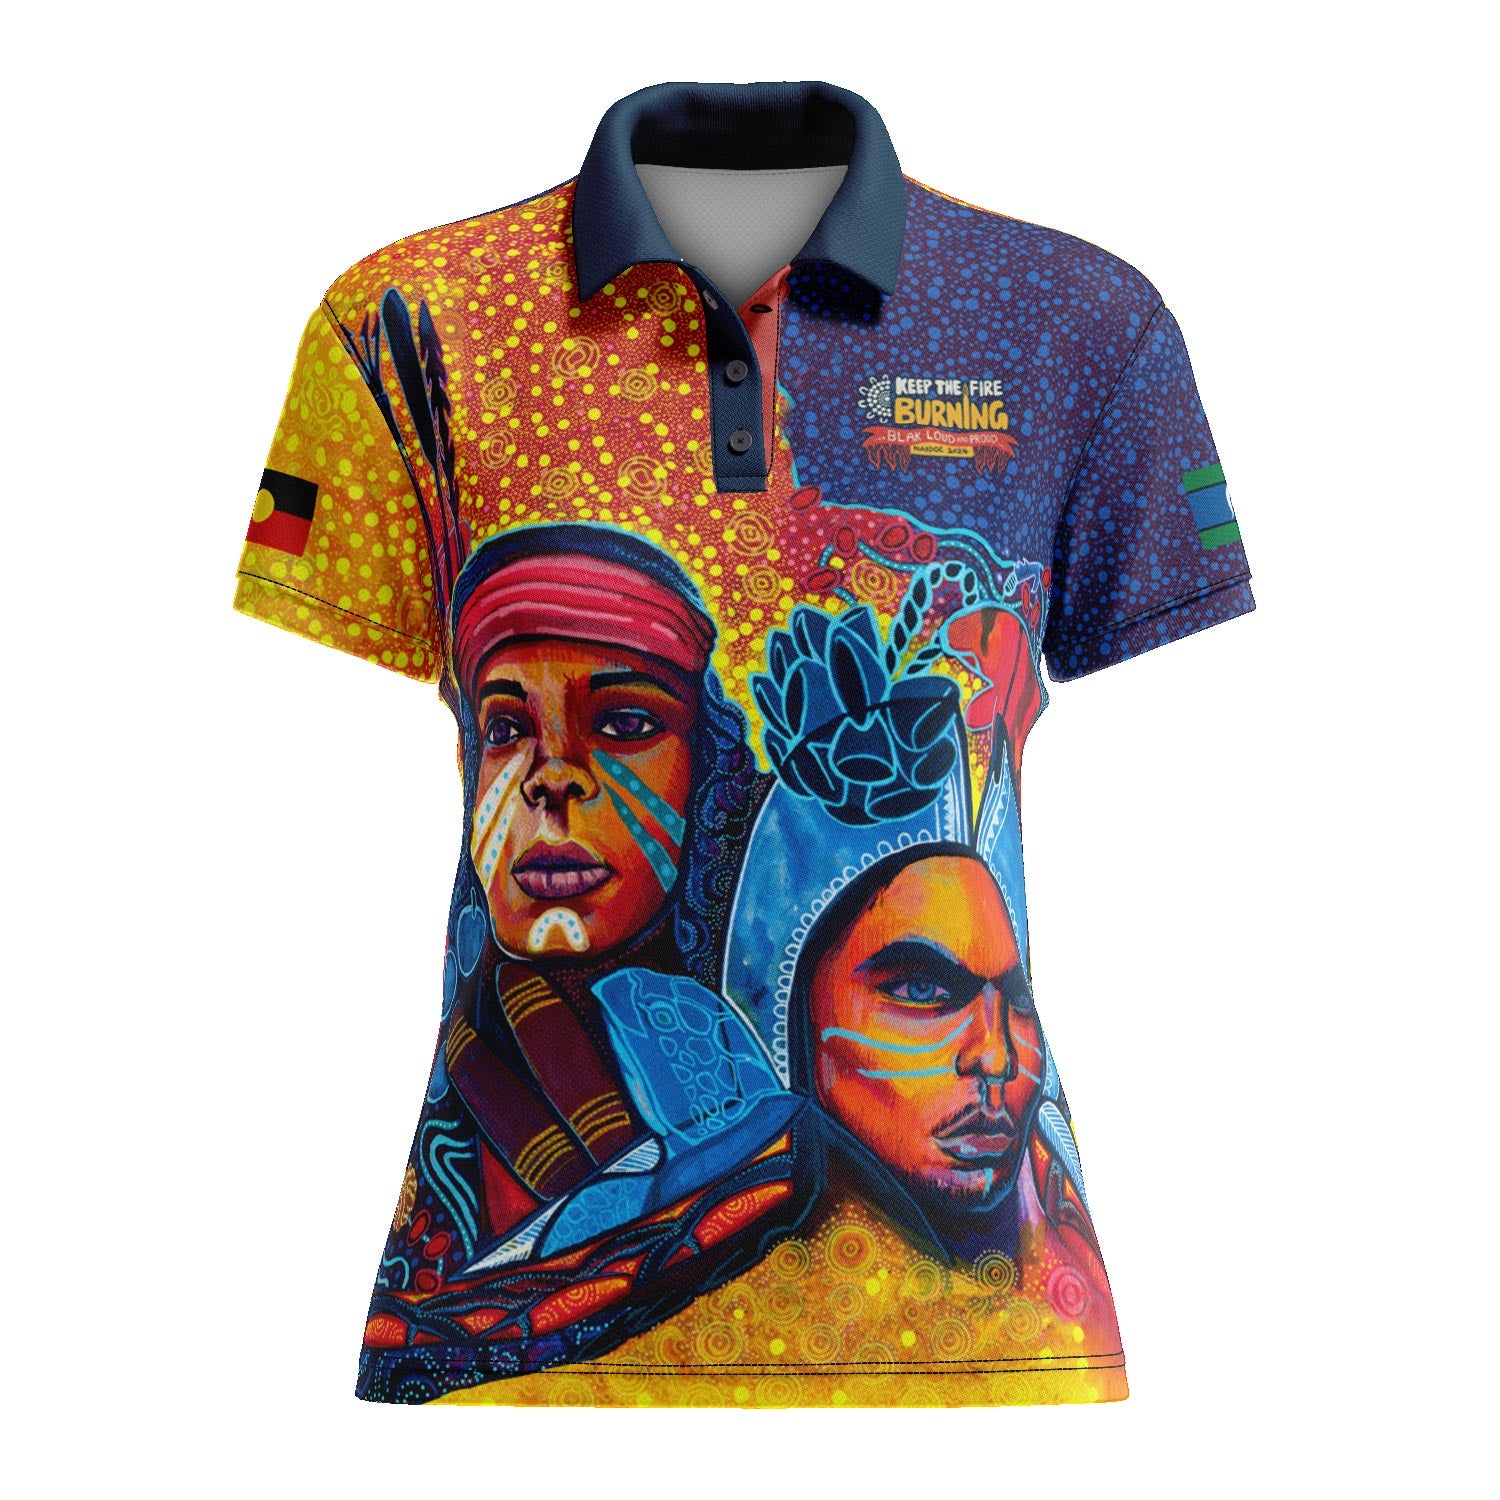 Fitted Polo, Embers - NAIDOC 2024